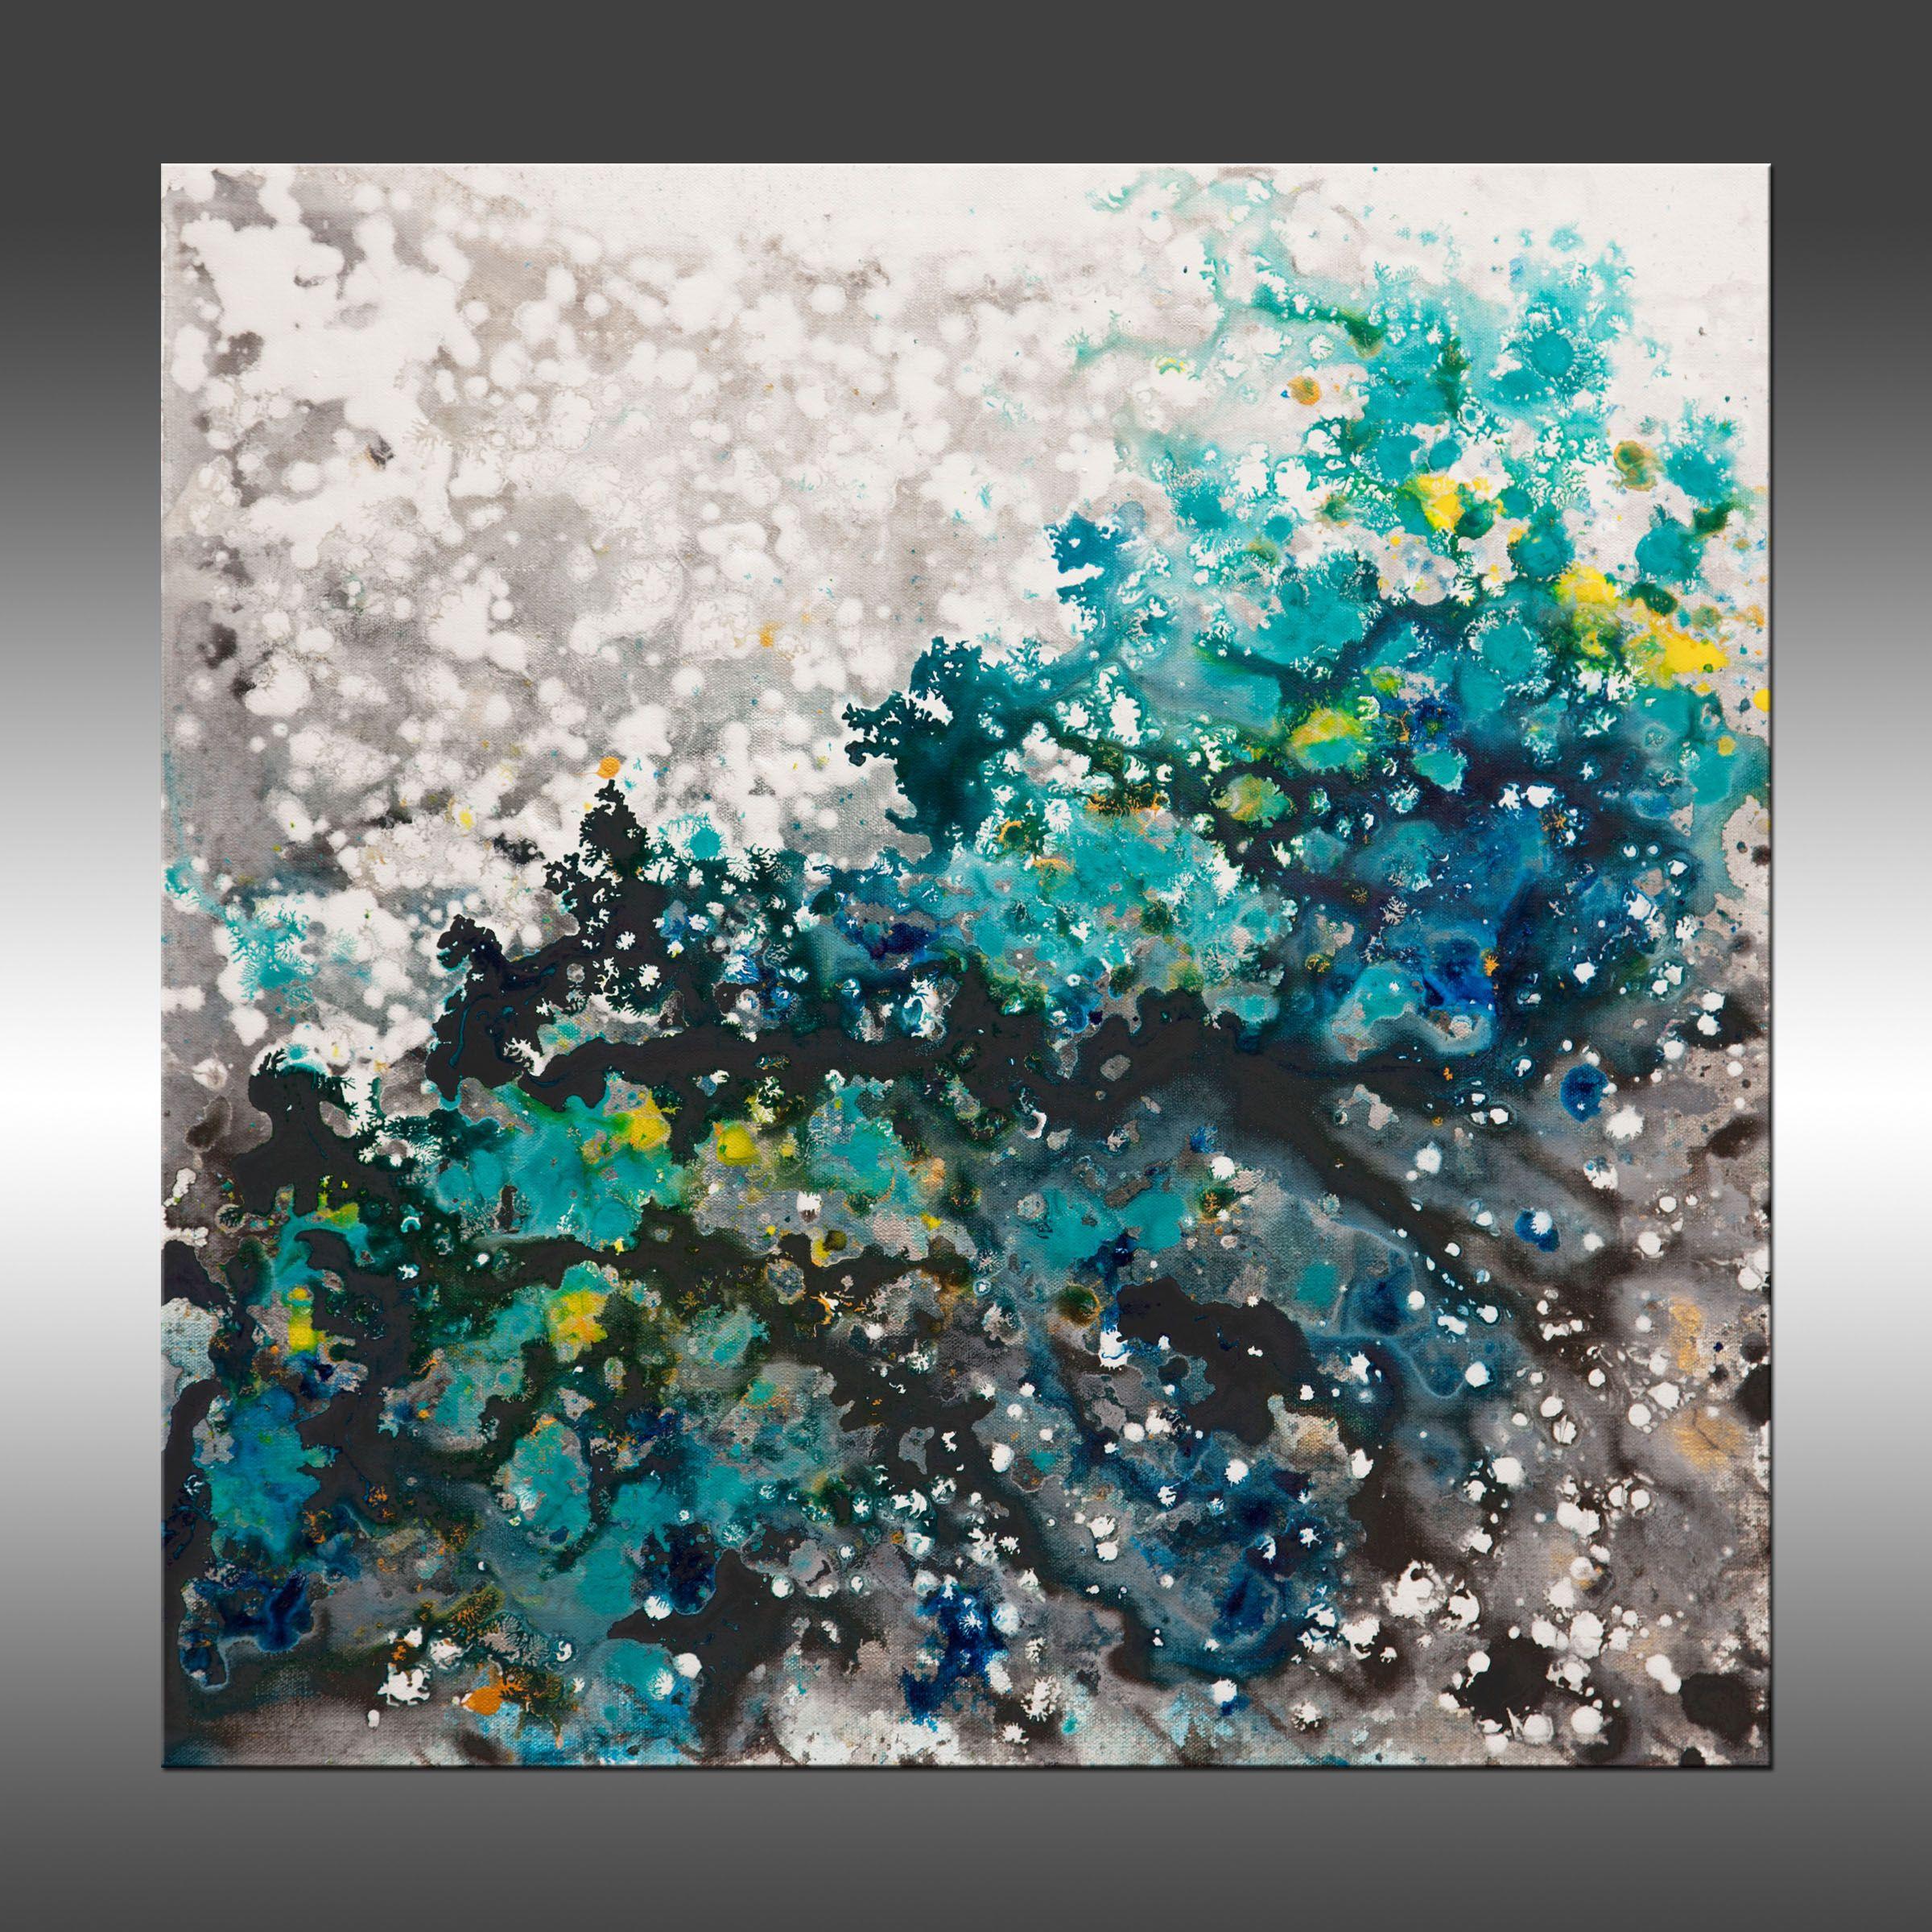 Liquid Energy 27 is an original painting, created with acrylic paint on gallery-wrapped canvas. It has a width of 24 inches and a height of 24 inches with a depth of 1 inch (24x24x1).    The colors used in the painting are white, gray, yellow, teal,